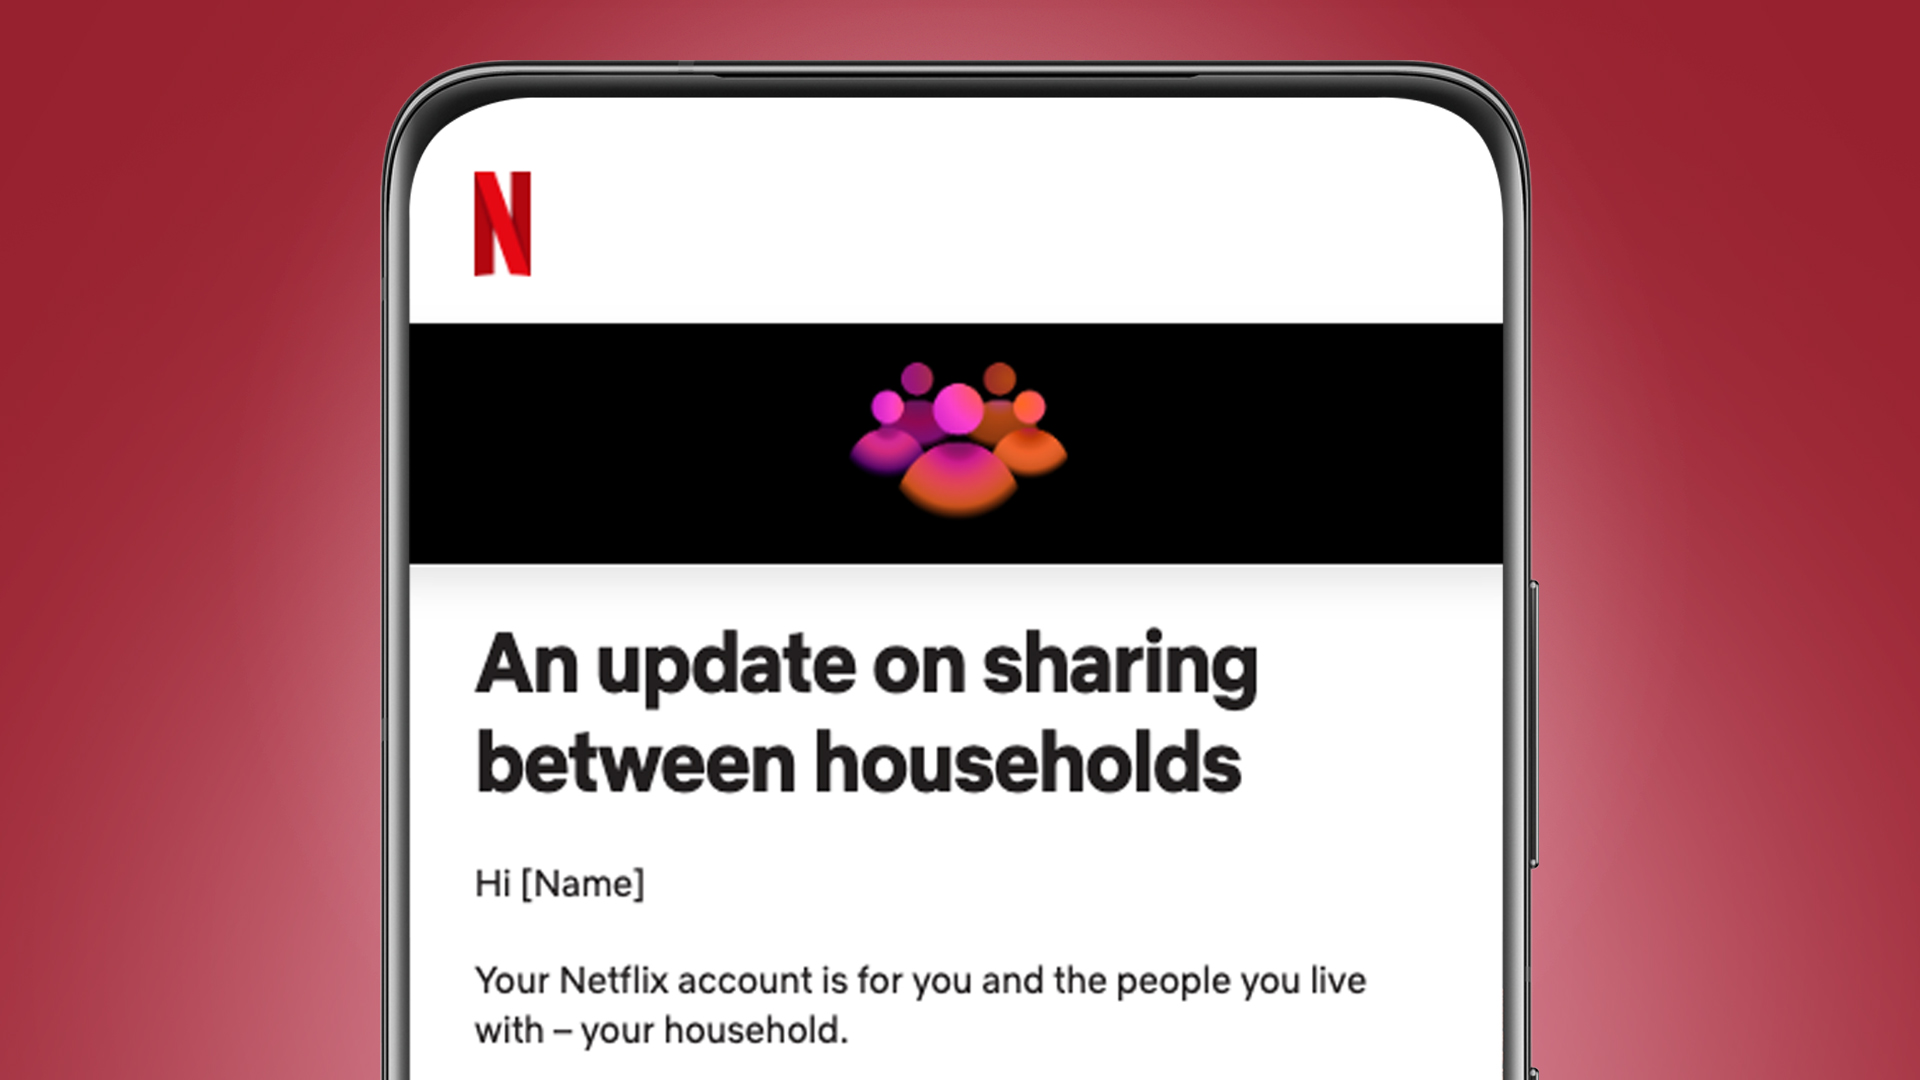 netflix-password-sharing-how-will-netflix-stop-it-and-how-much-will-it